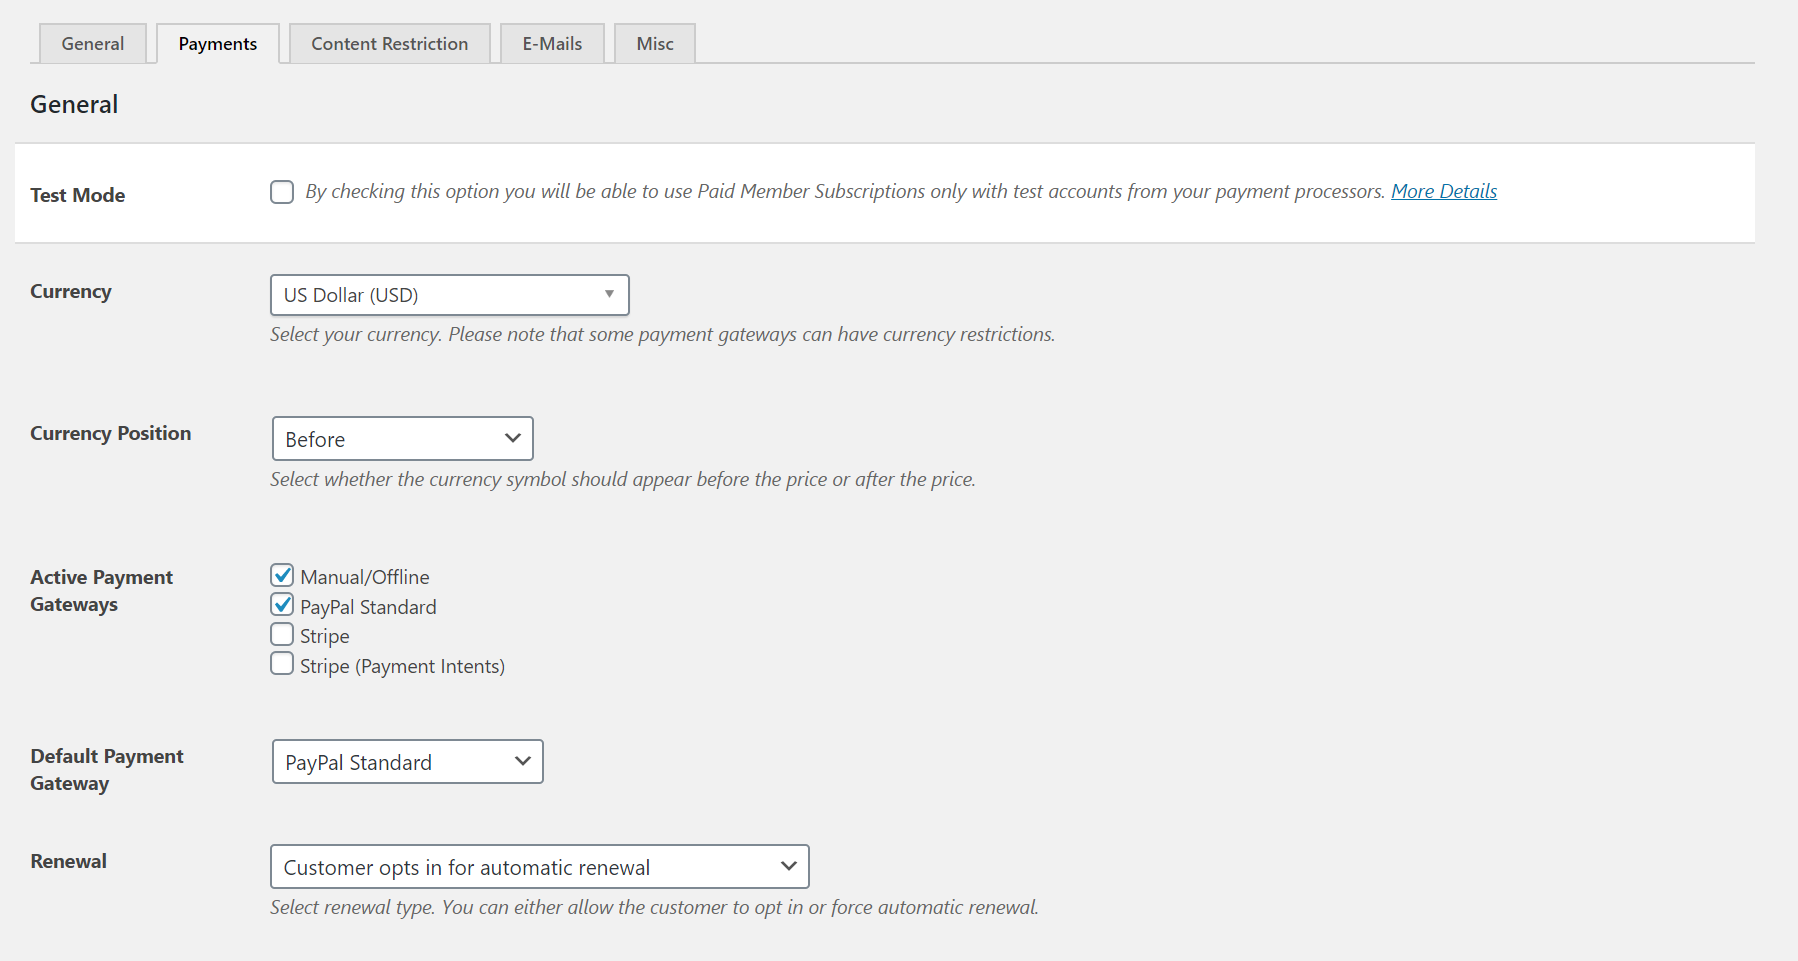 Enabling PayPal payments for Paid Member Subscriptions